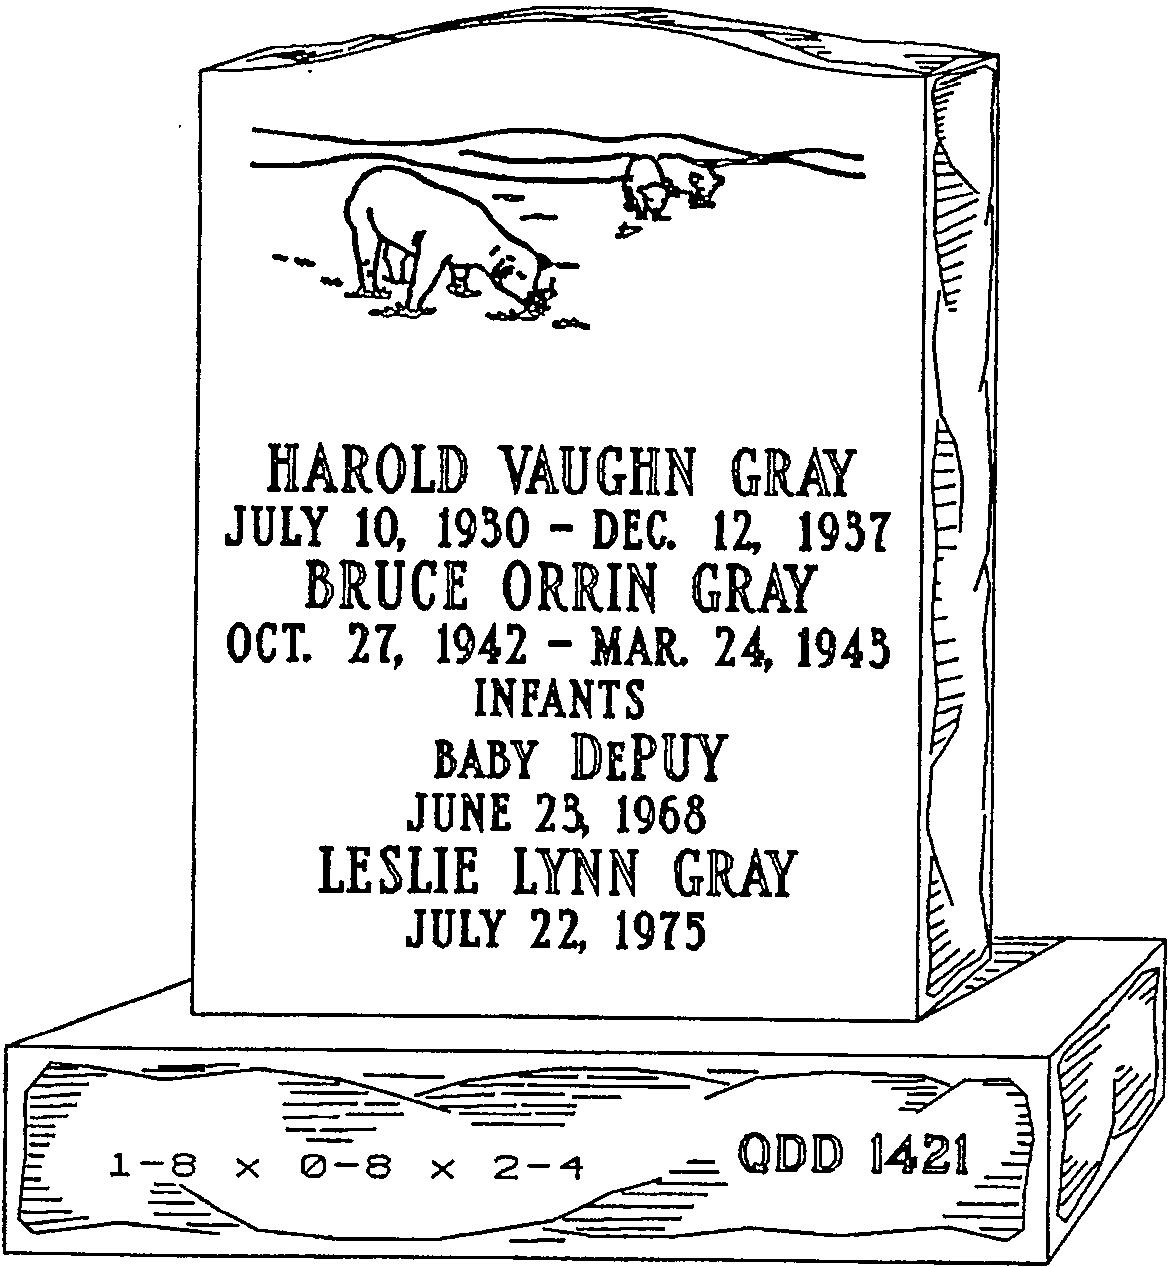 a black and white drawing of a gravestone for harold vaughn gray